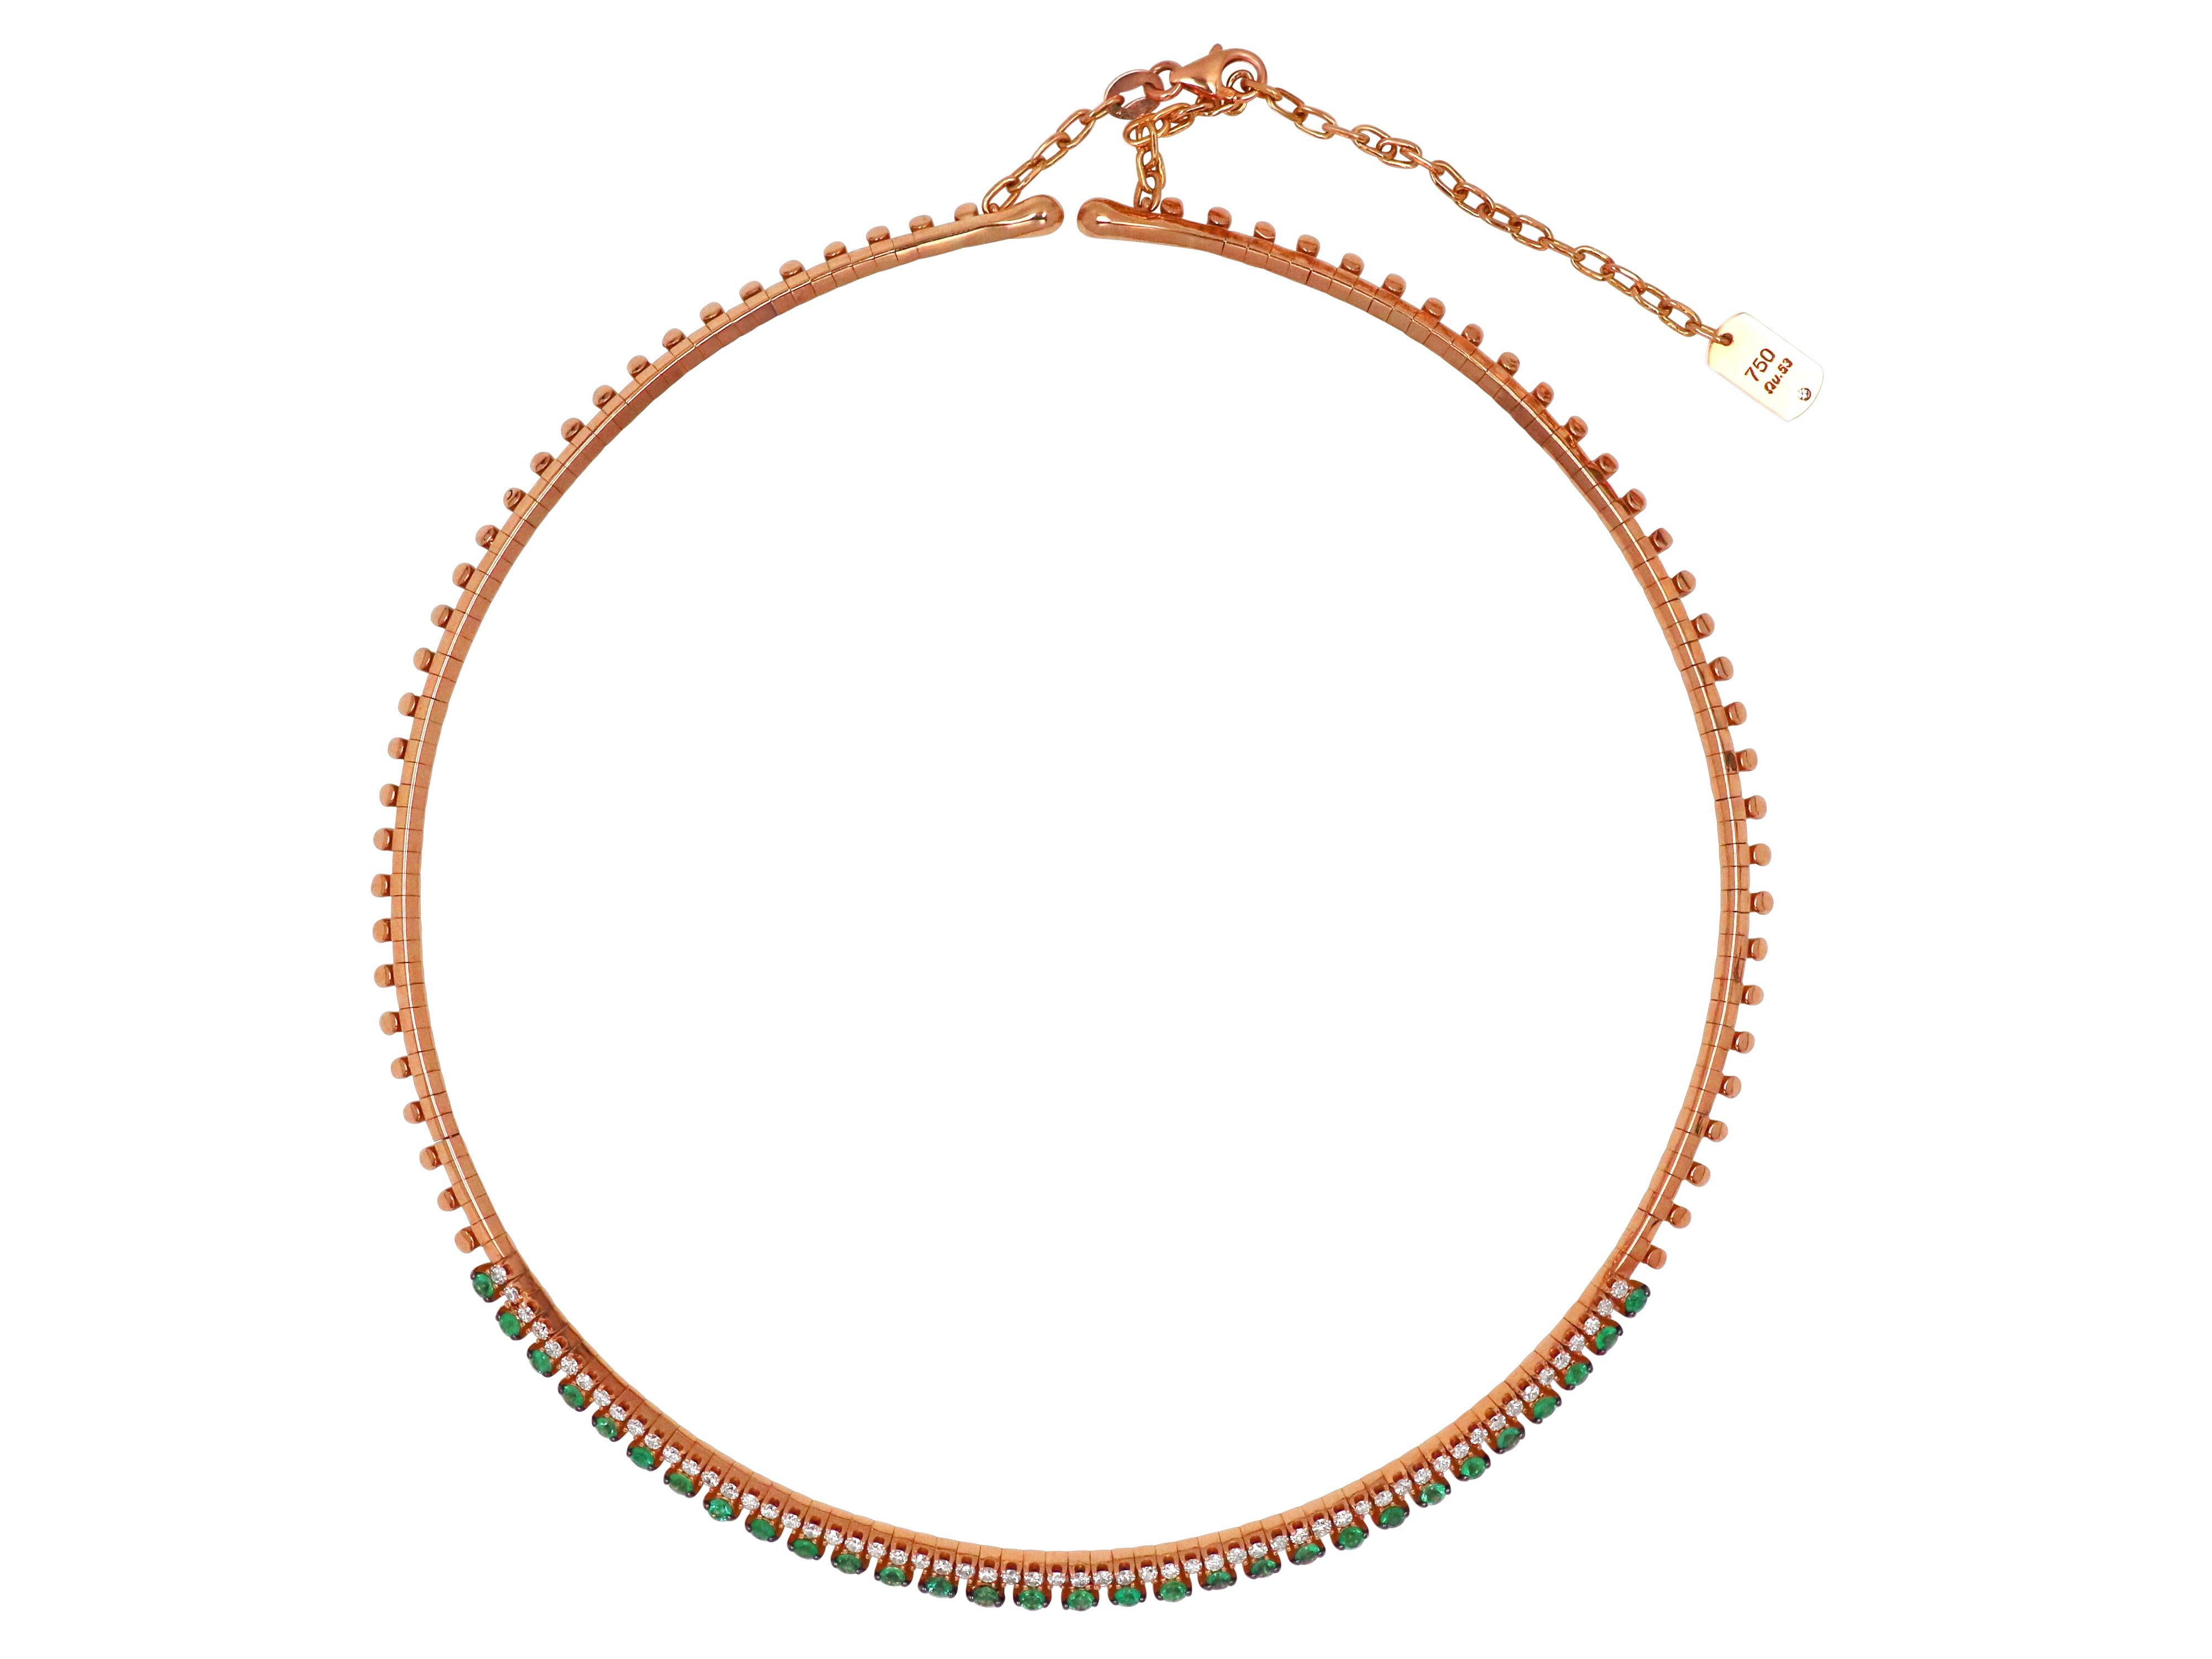 Collar necklace in 18k rose gold with 0.81 carats emeralds and 0.66 carats brilliant cut diamonds. The length is adjustable with extra links.

Max. length: 14.960”, 38cm
Min. length: 12.598”, 32cm
